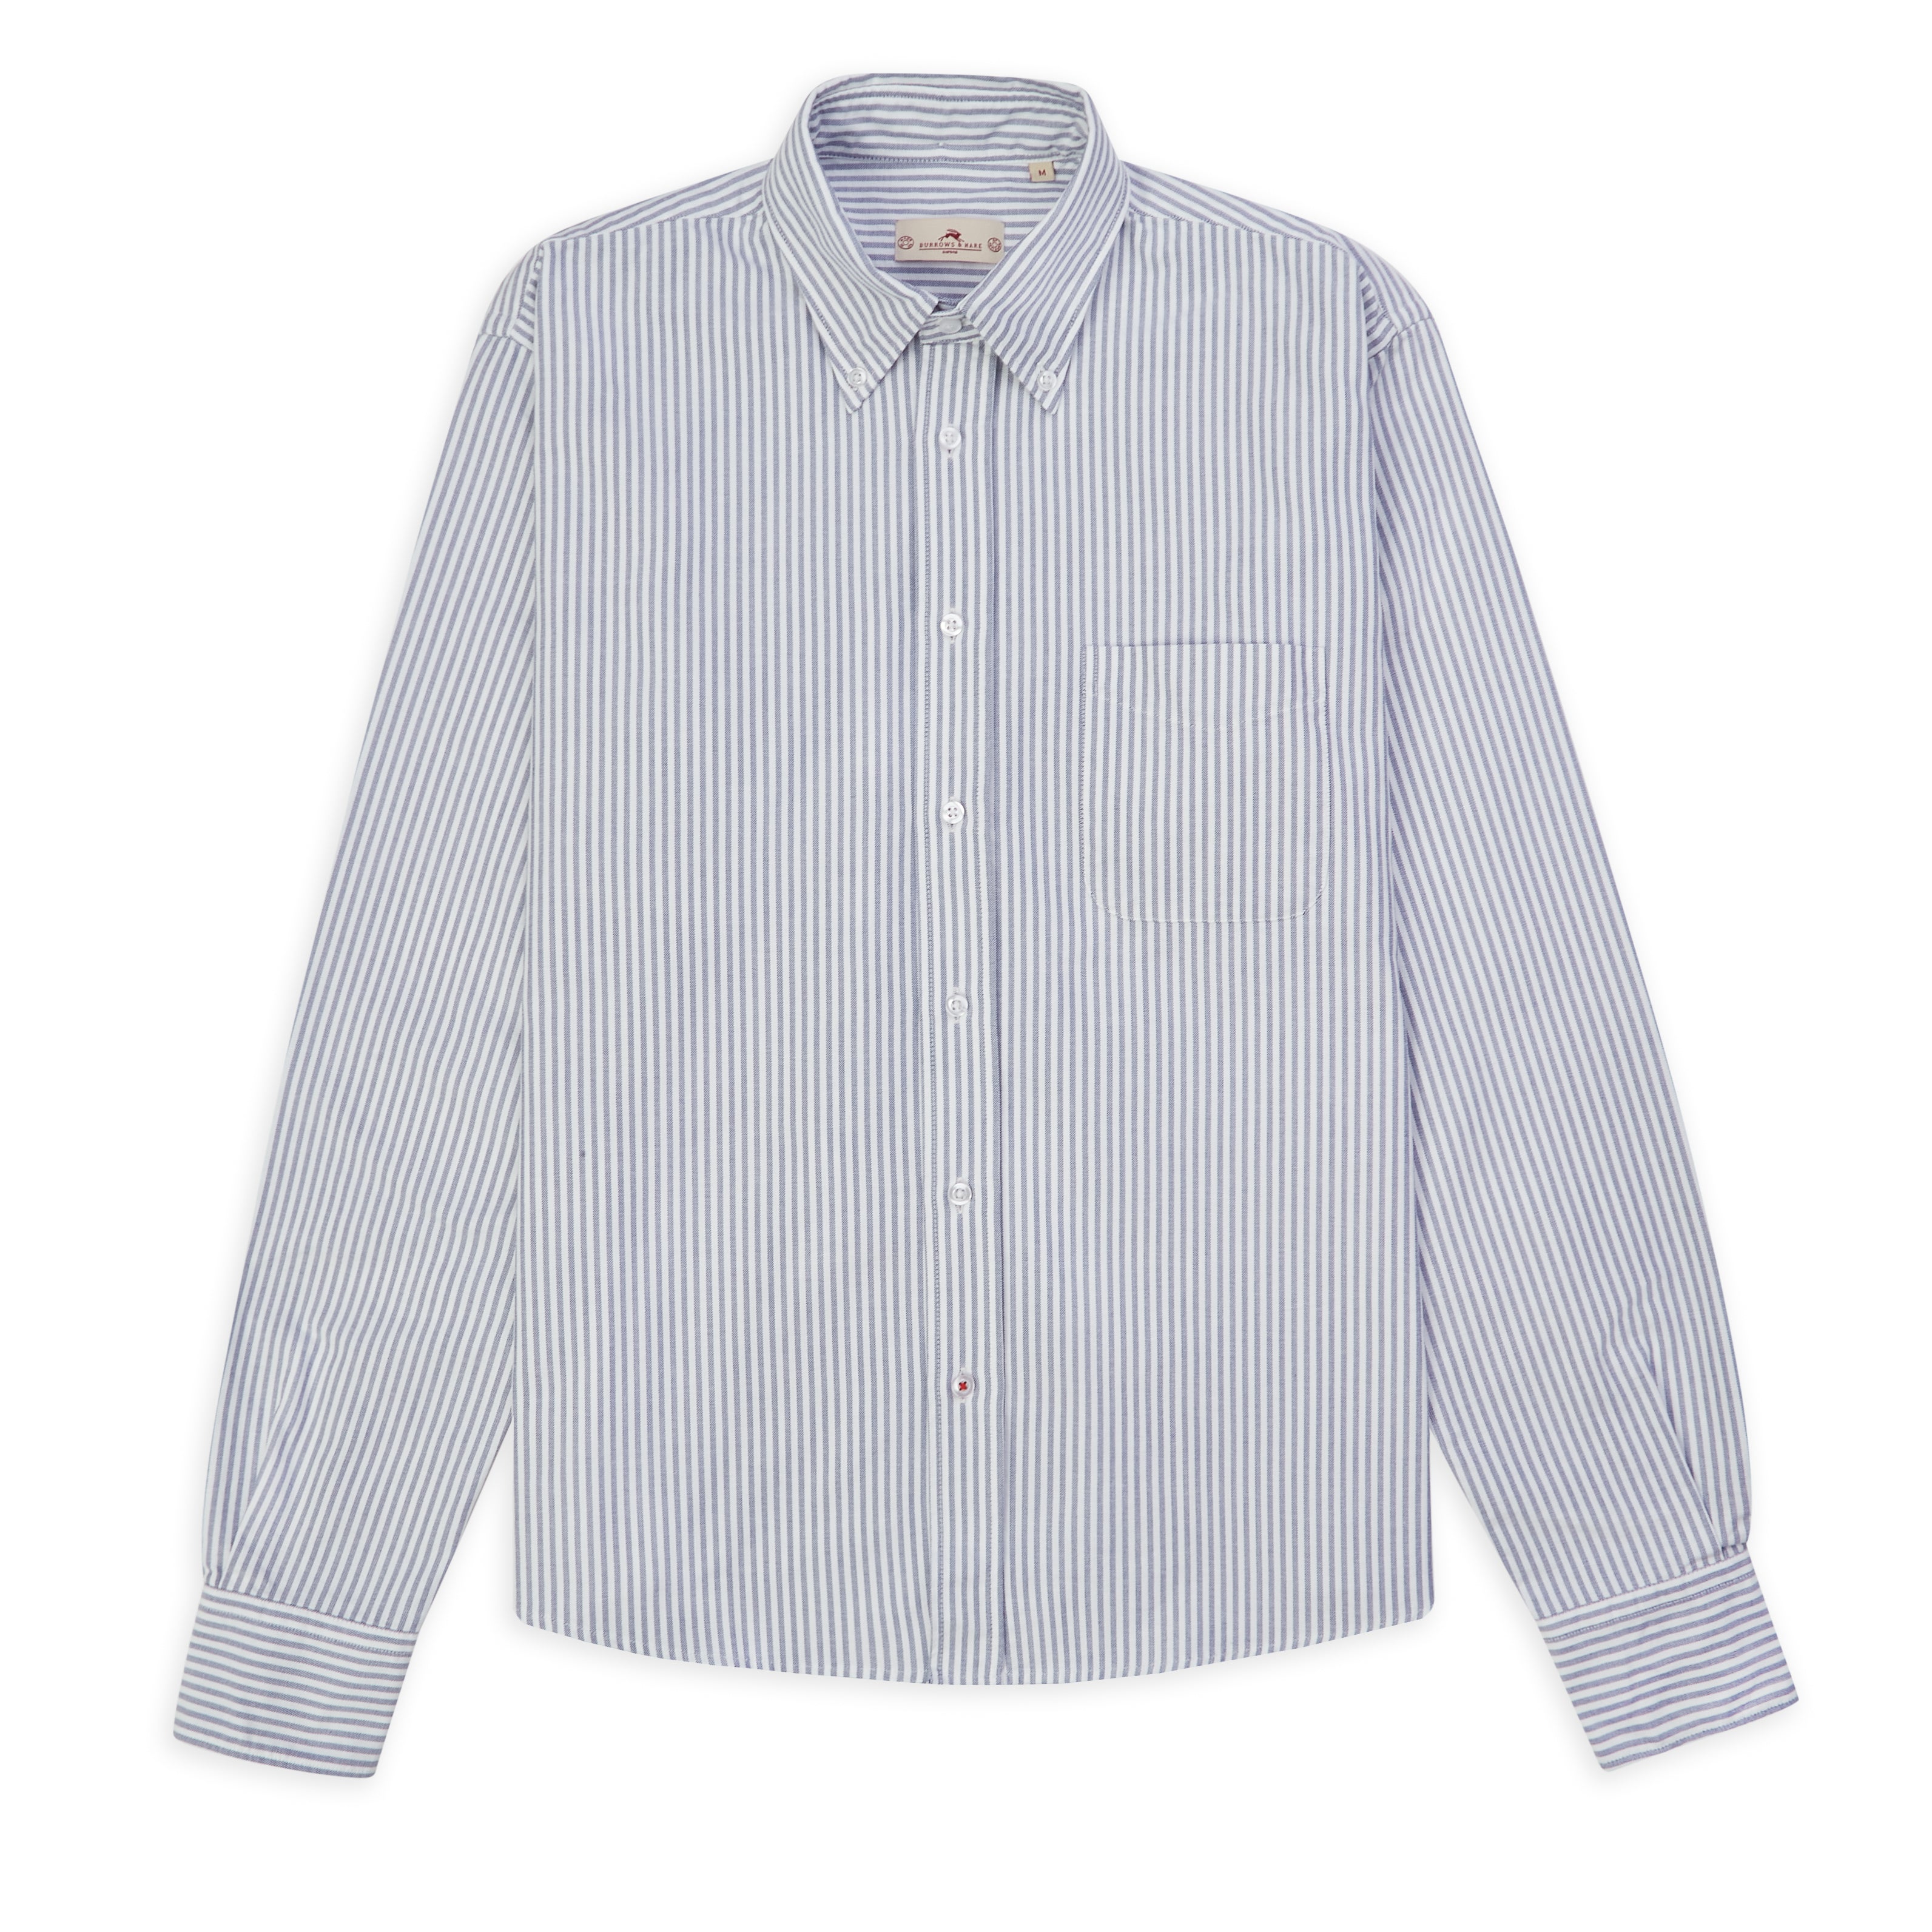 burrows-and-hare-oxford-button-down-shirt-stripe